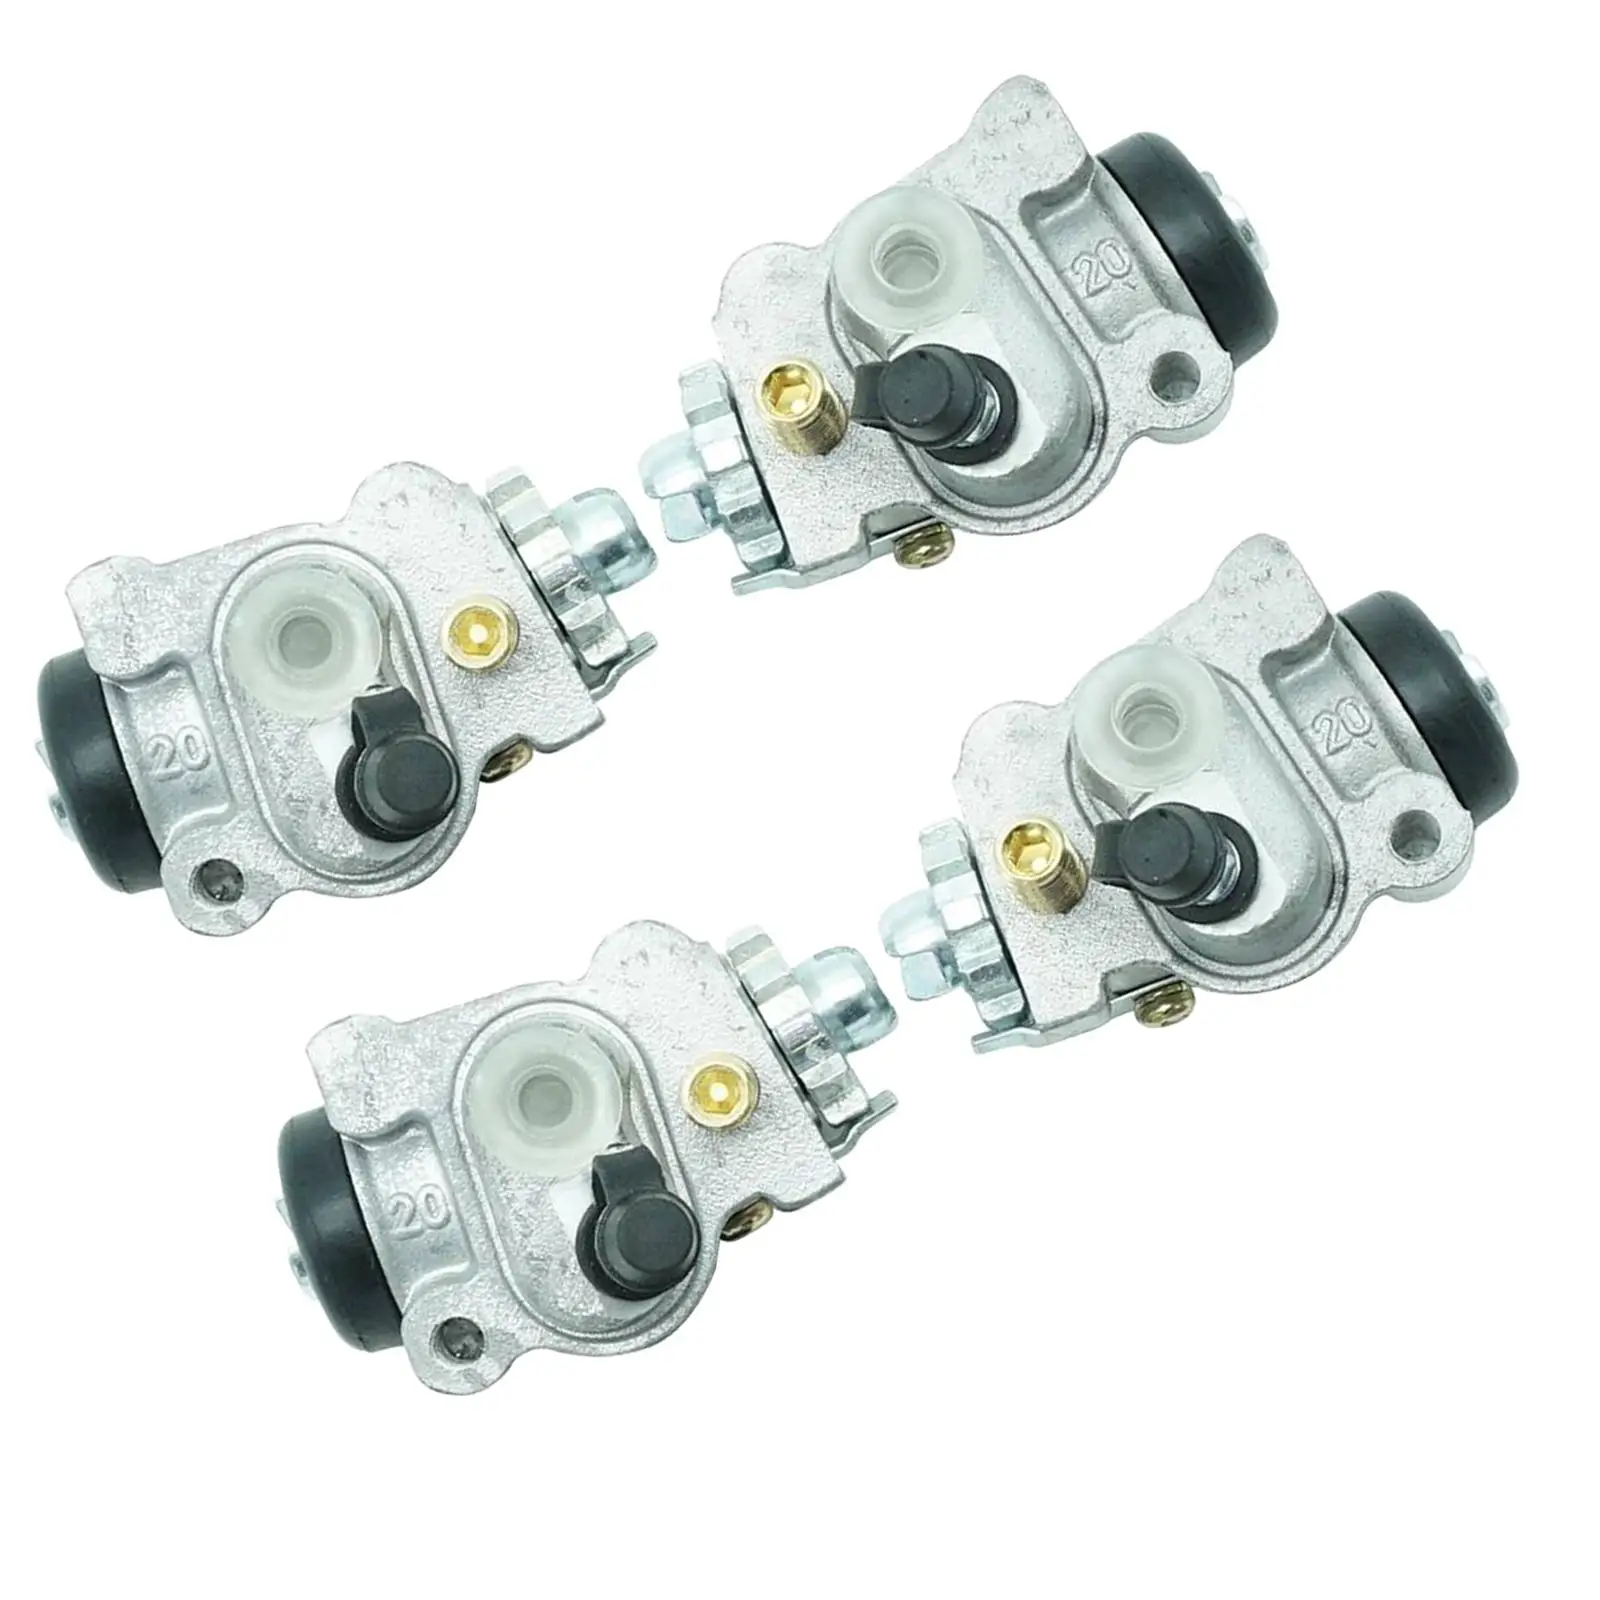 4x 45310-Hn0-A01 Front Brake Wheel Cylinders for Honda Foreman 450 Replaces Parts Car Accessories Spare Parts Durable